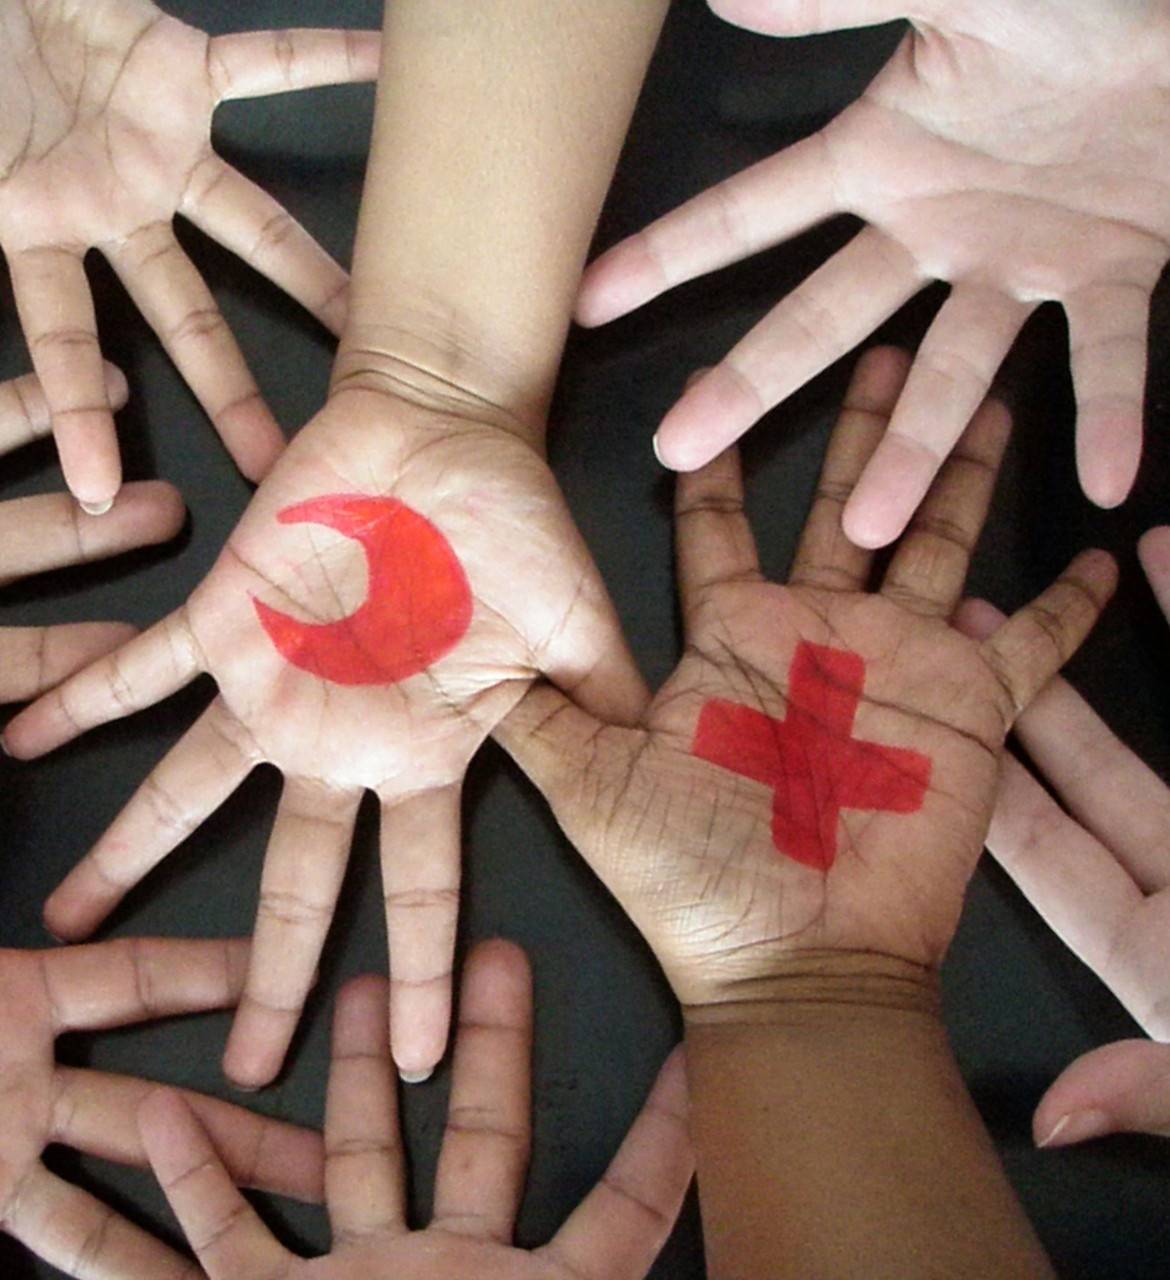 April 30, 2009. Male', Maldives. Red Cross and Red Crescent symbols painted on hands of American Red Cross Maldives staff members. Photo by Salva Ahmed/American Red Cross